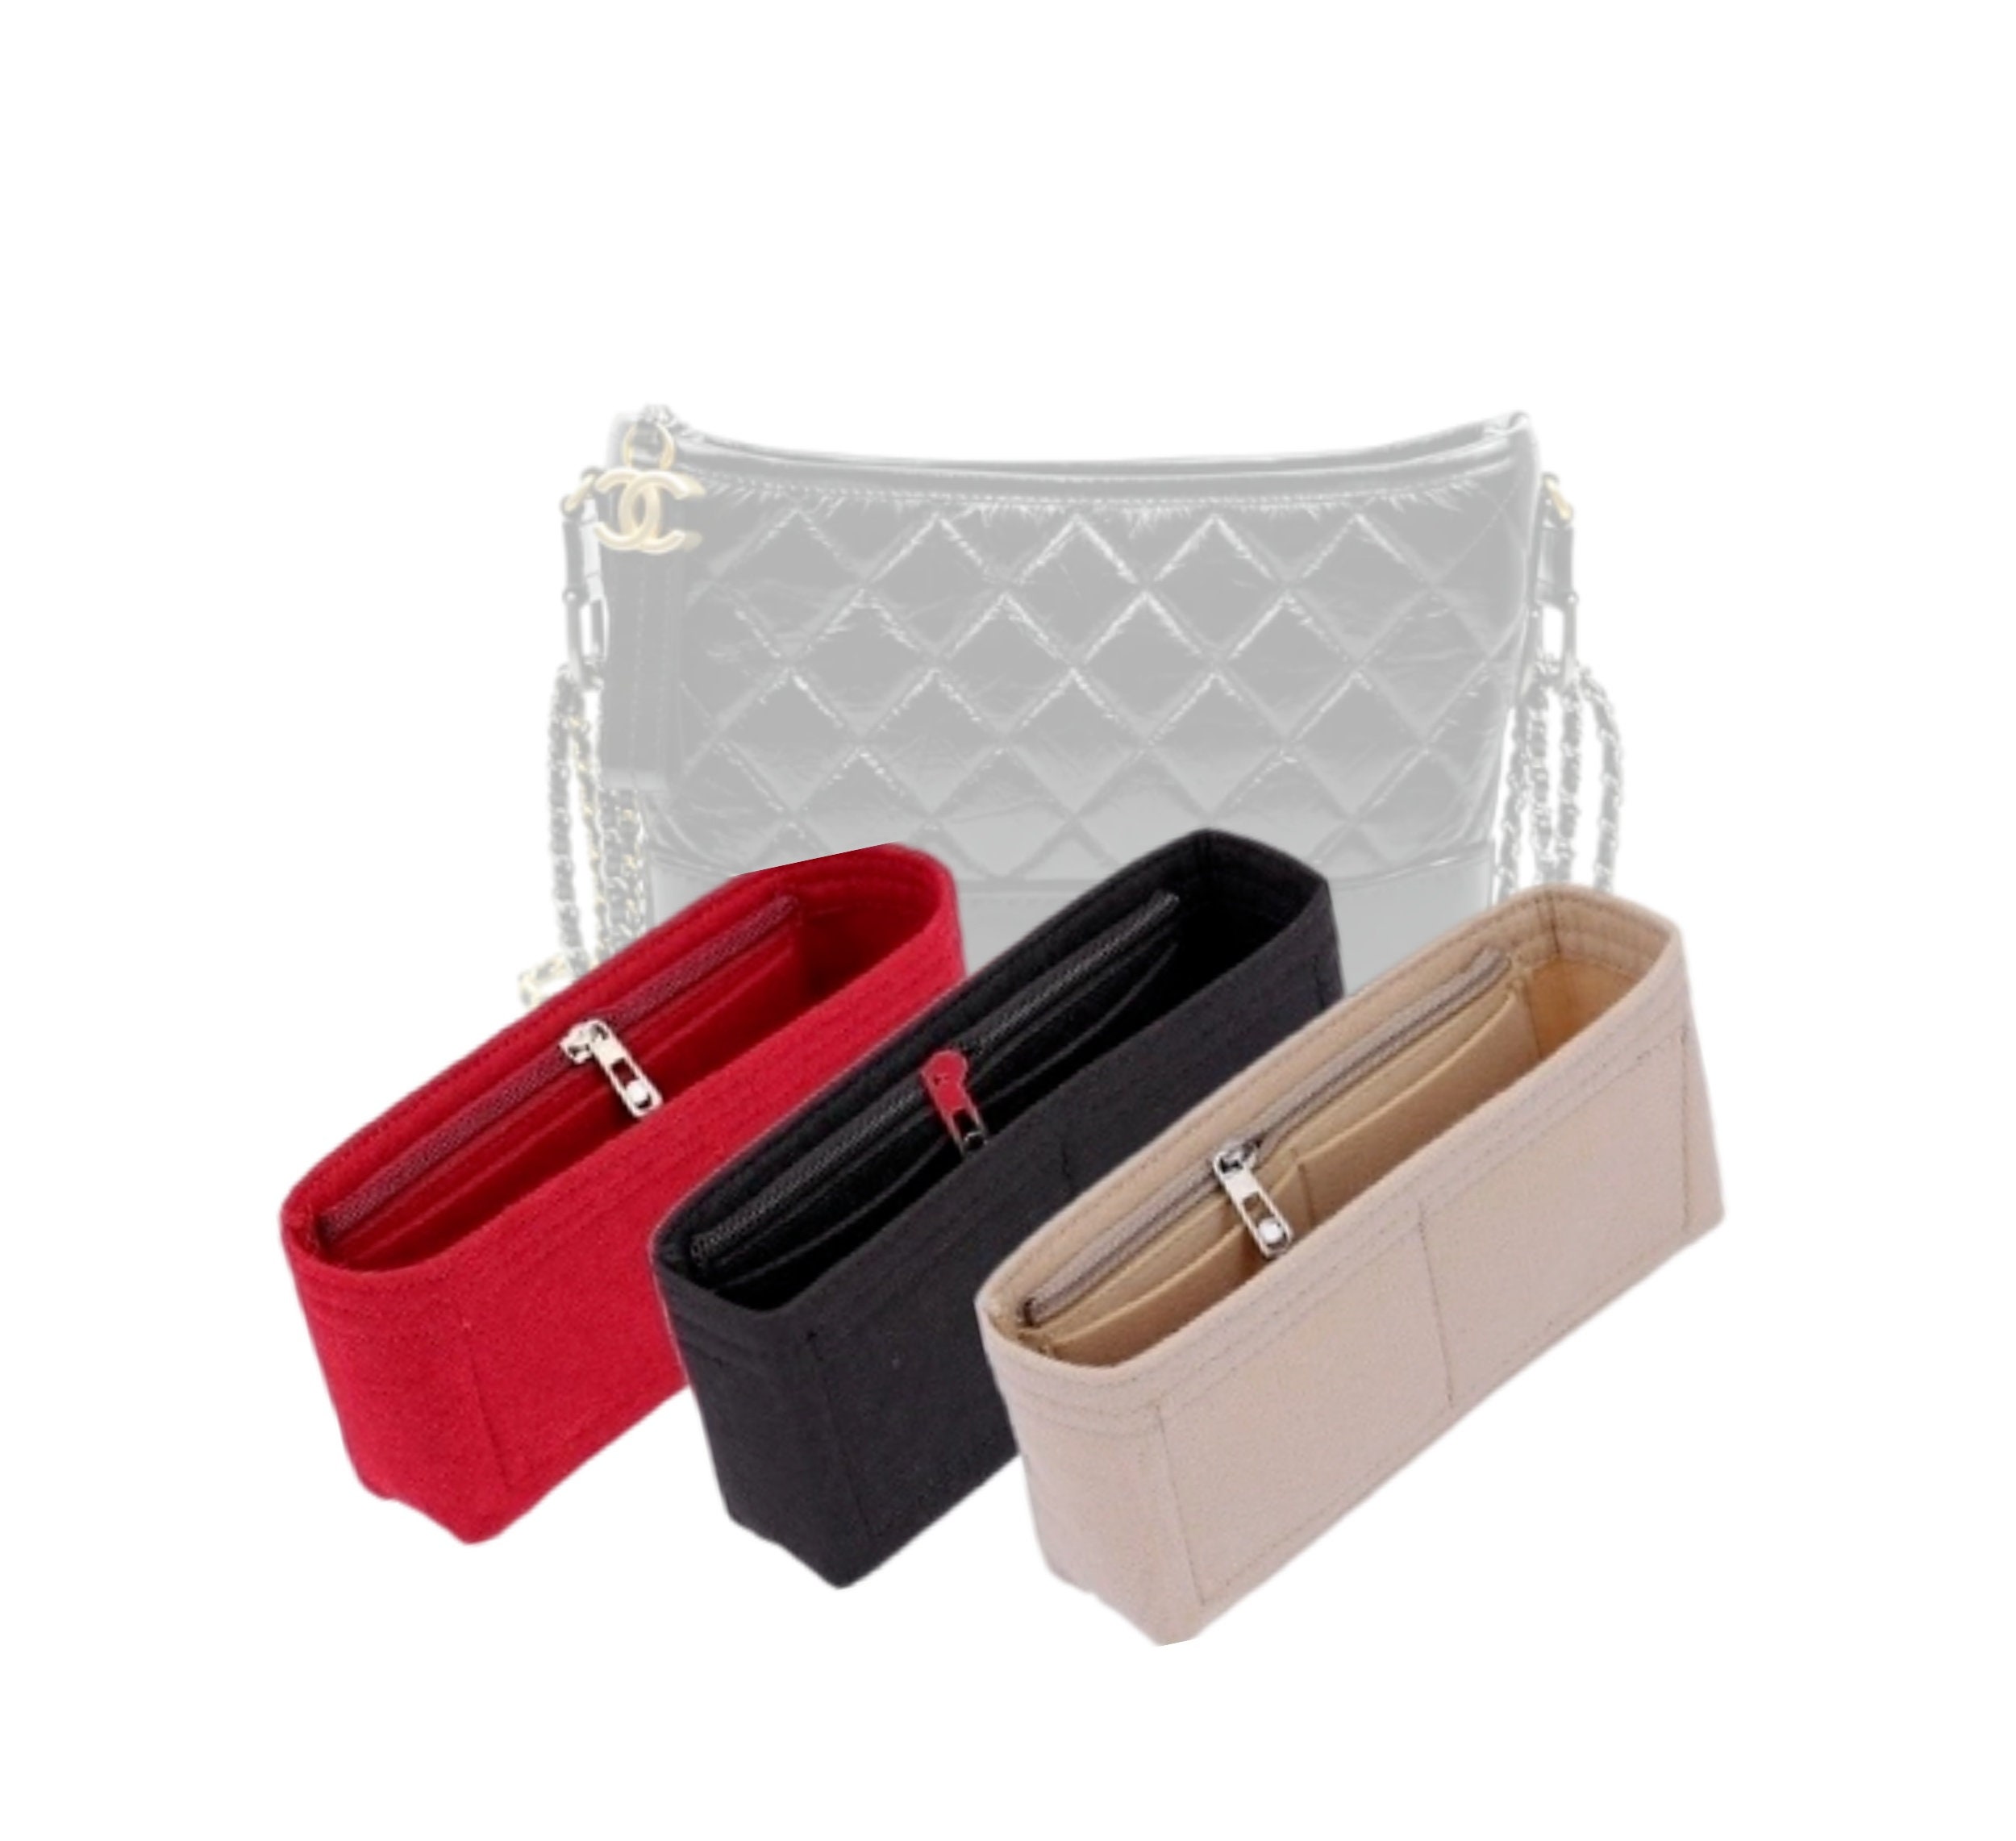 Tote Bag Organizer for Louis Vuitton Tuileries Hobo Bag with Double Bottle Holders